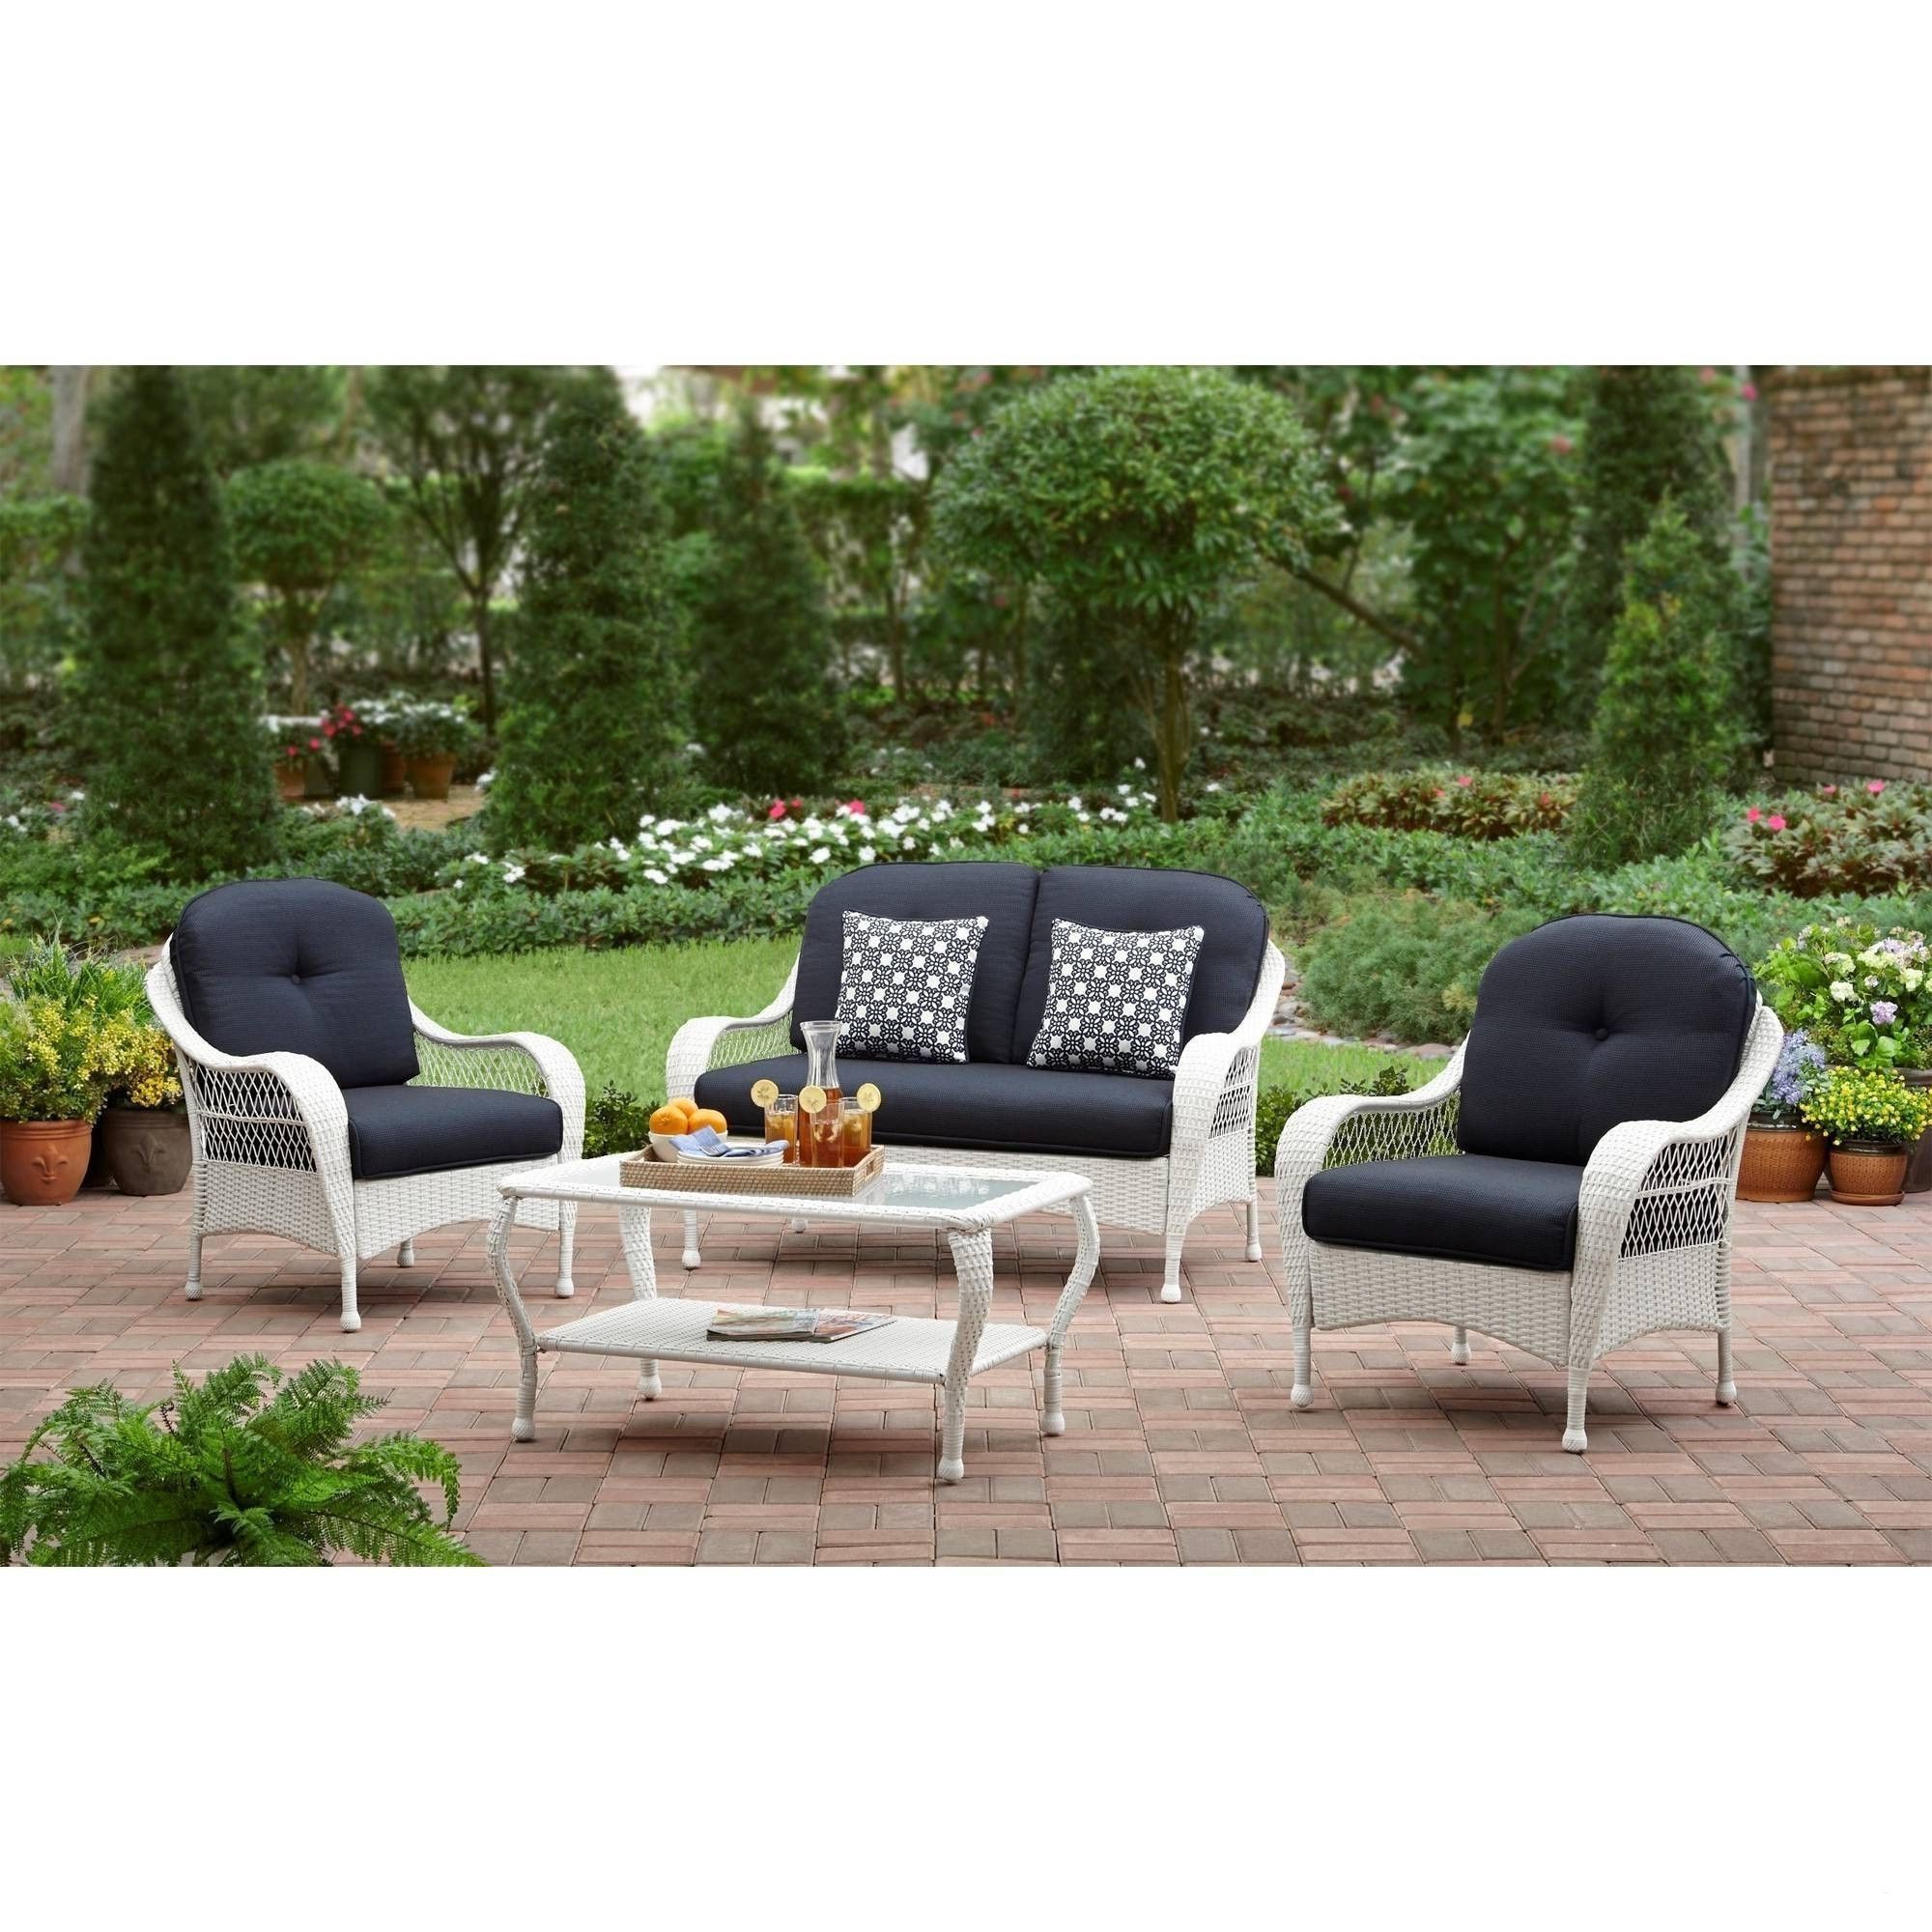 Patio Conversation Sets At Target In Fashionable Delightful Conversation Sets Patio Furniture Clearance 18 Attractive (View 14 of 15)